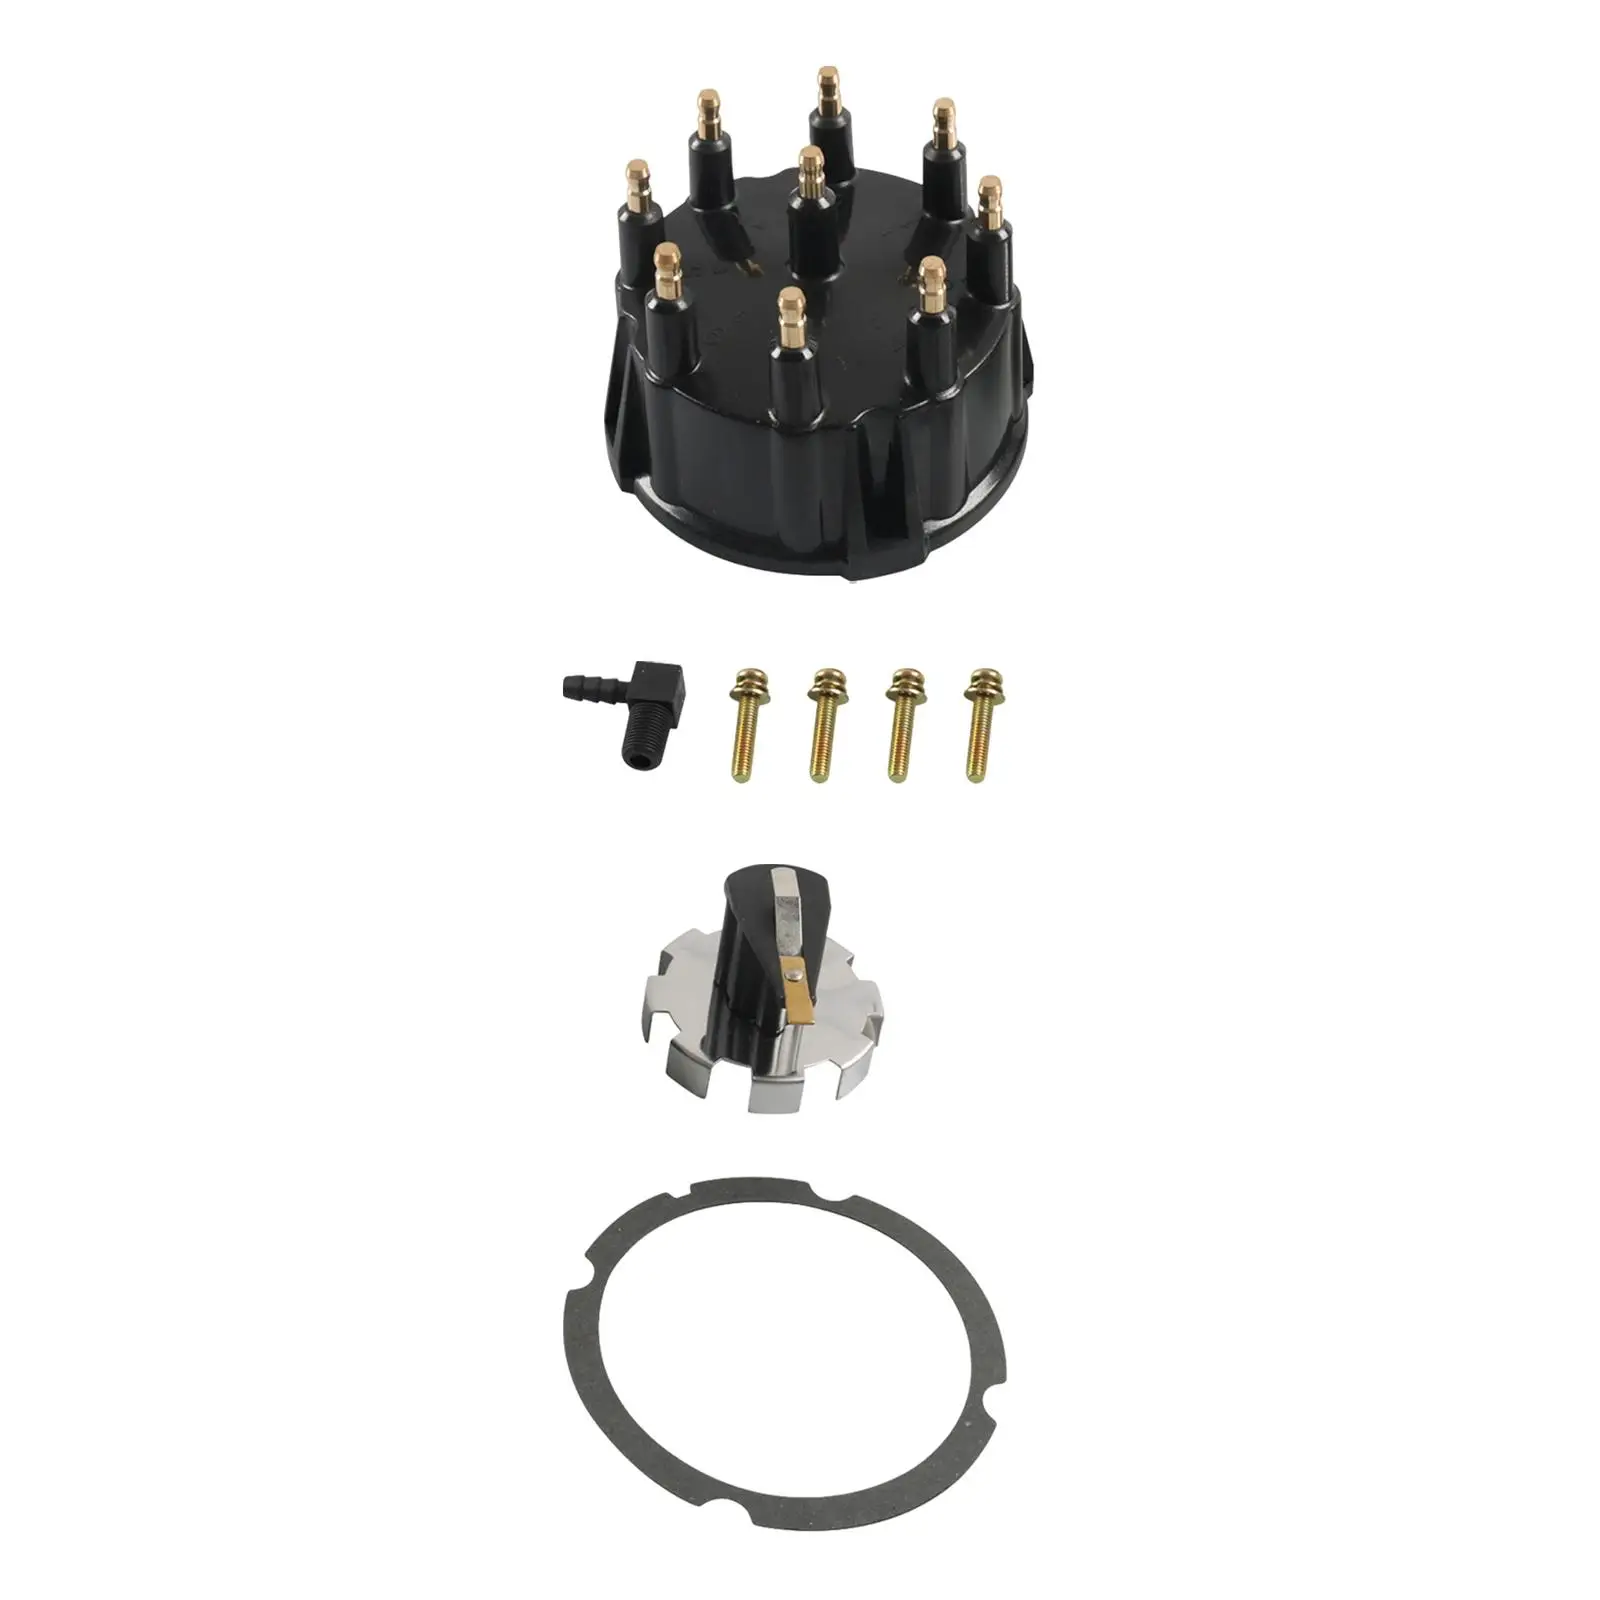 805759Q3 Accessories High Performance Replaces Distributor Cap Tune up Set